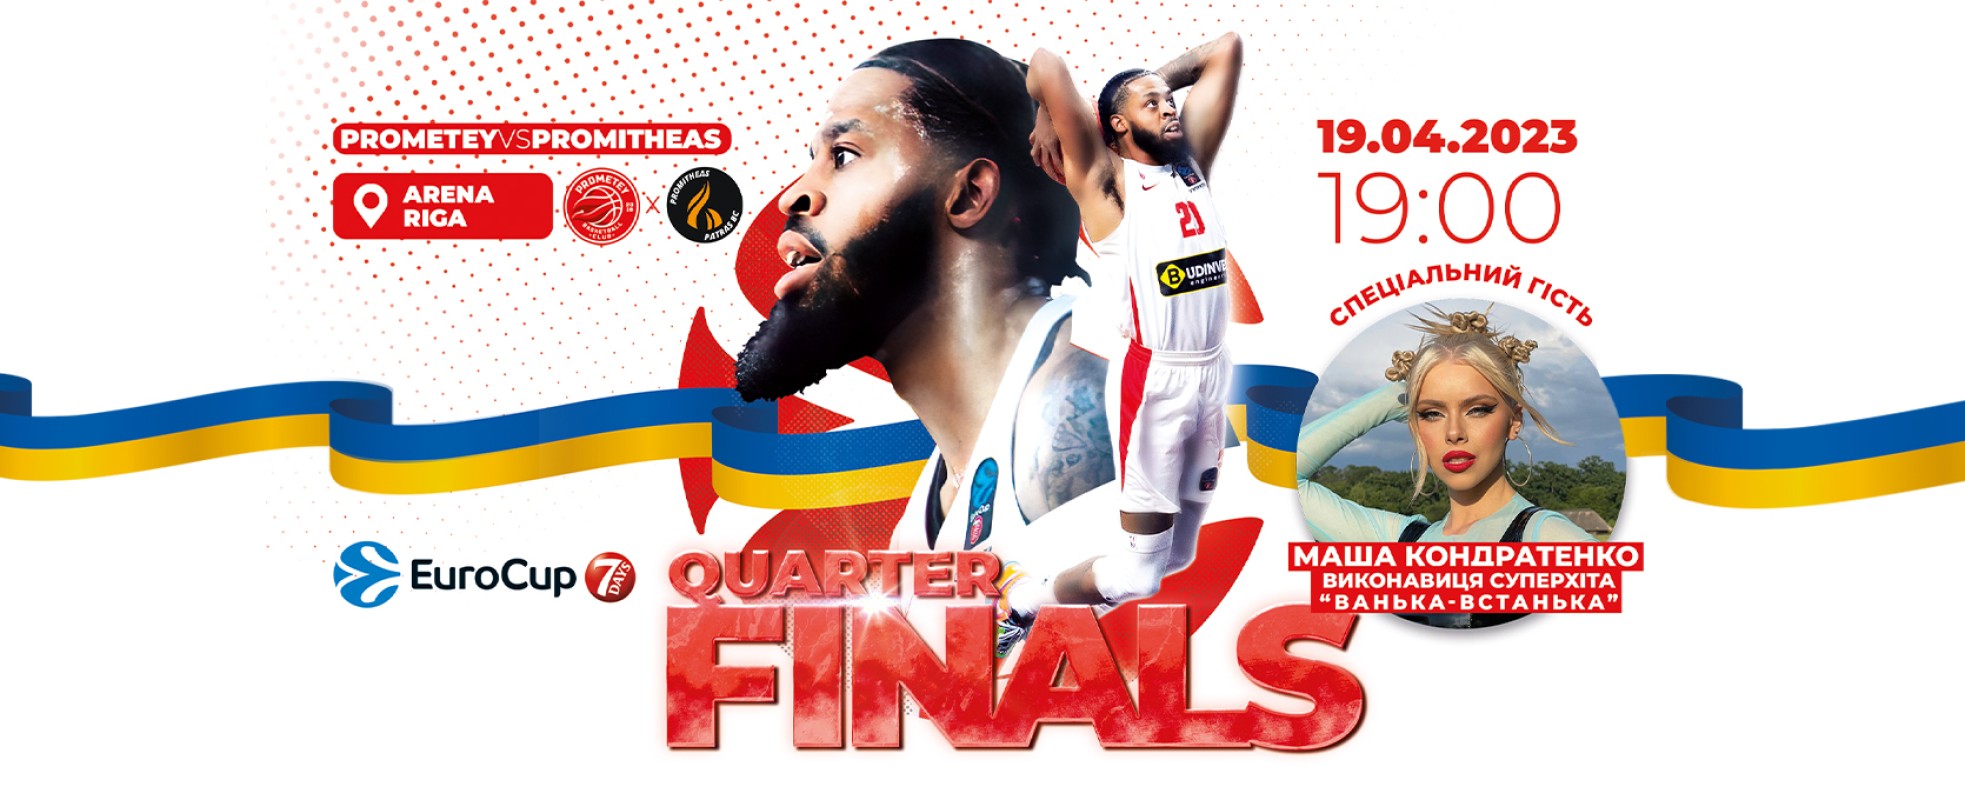 Tickets for the 1/4 final of the 7DAYS EuroCup 2022/2023 season are now